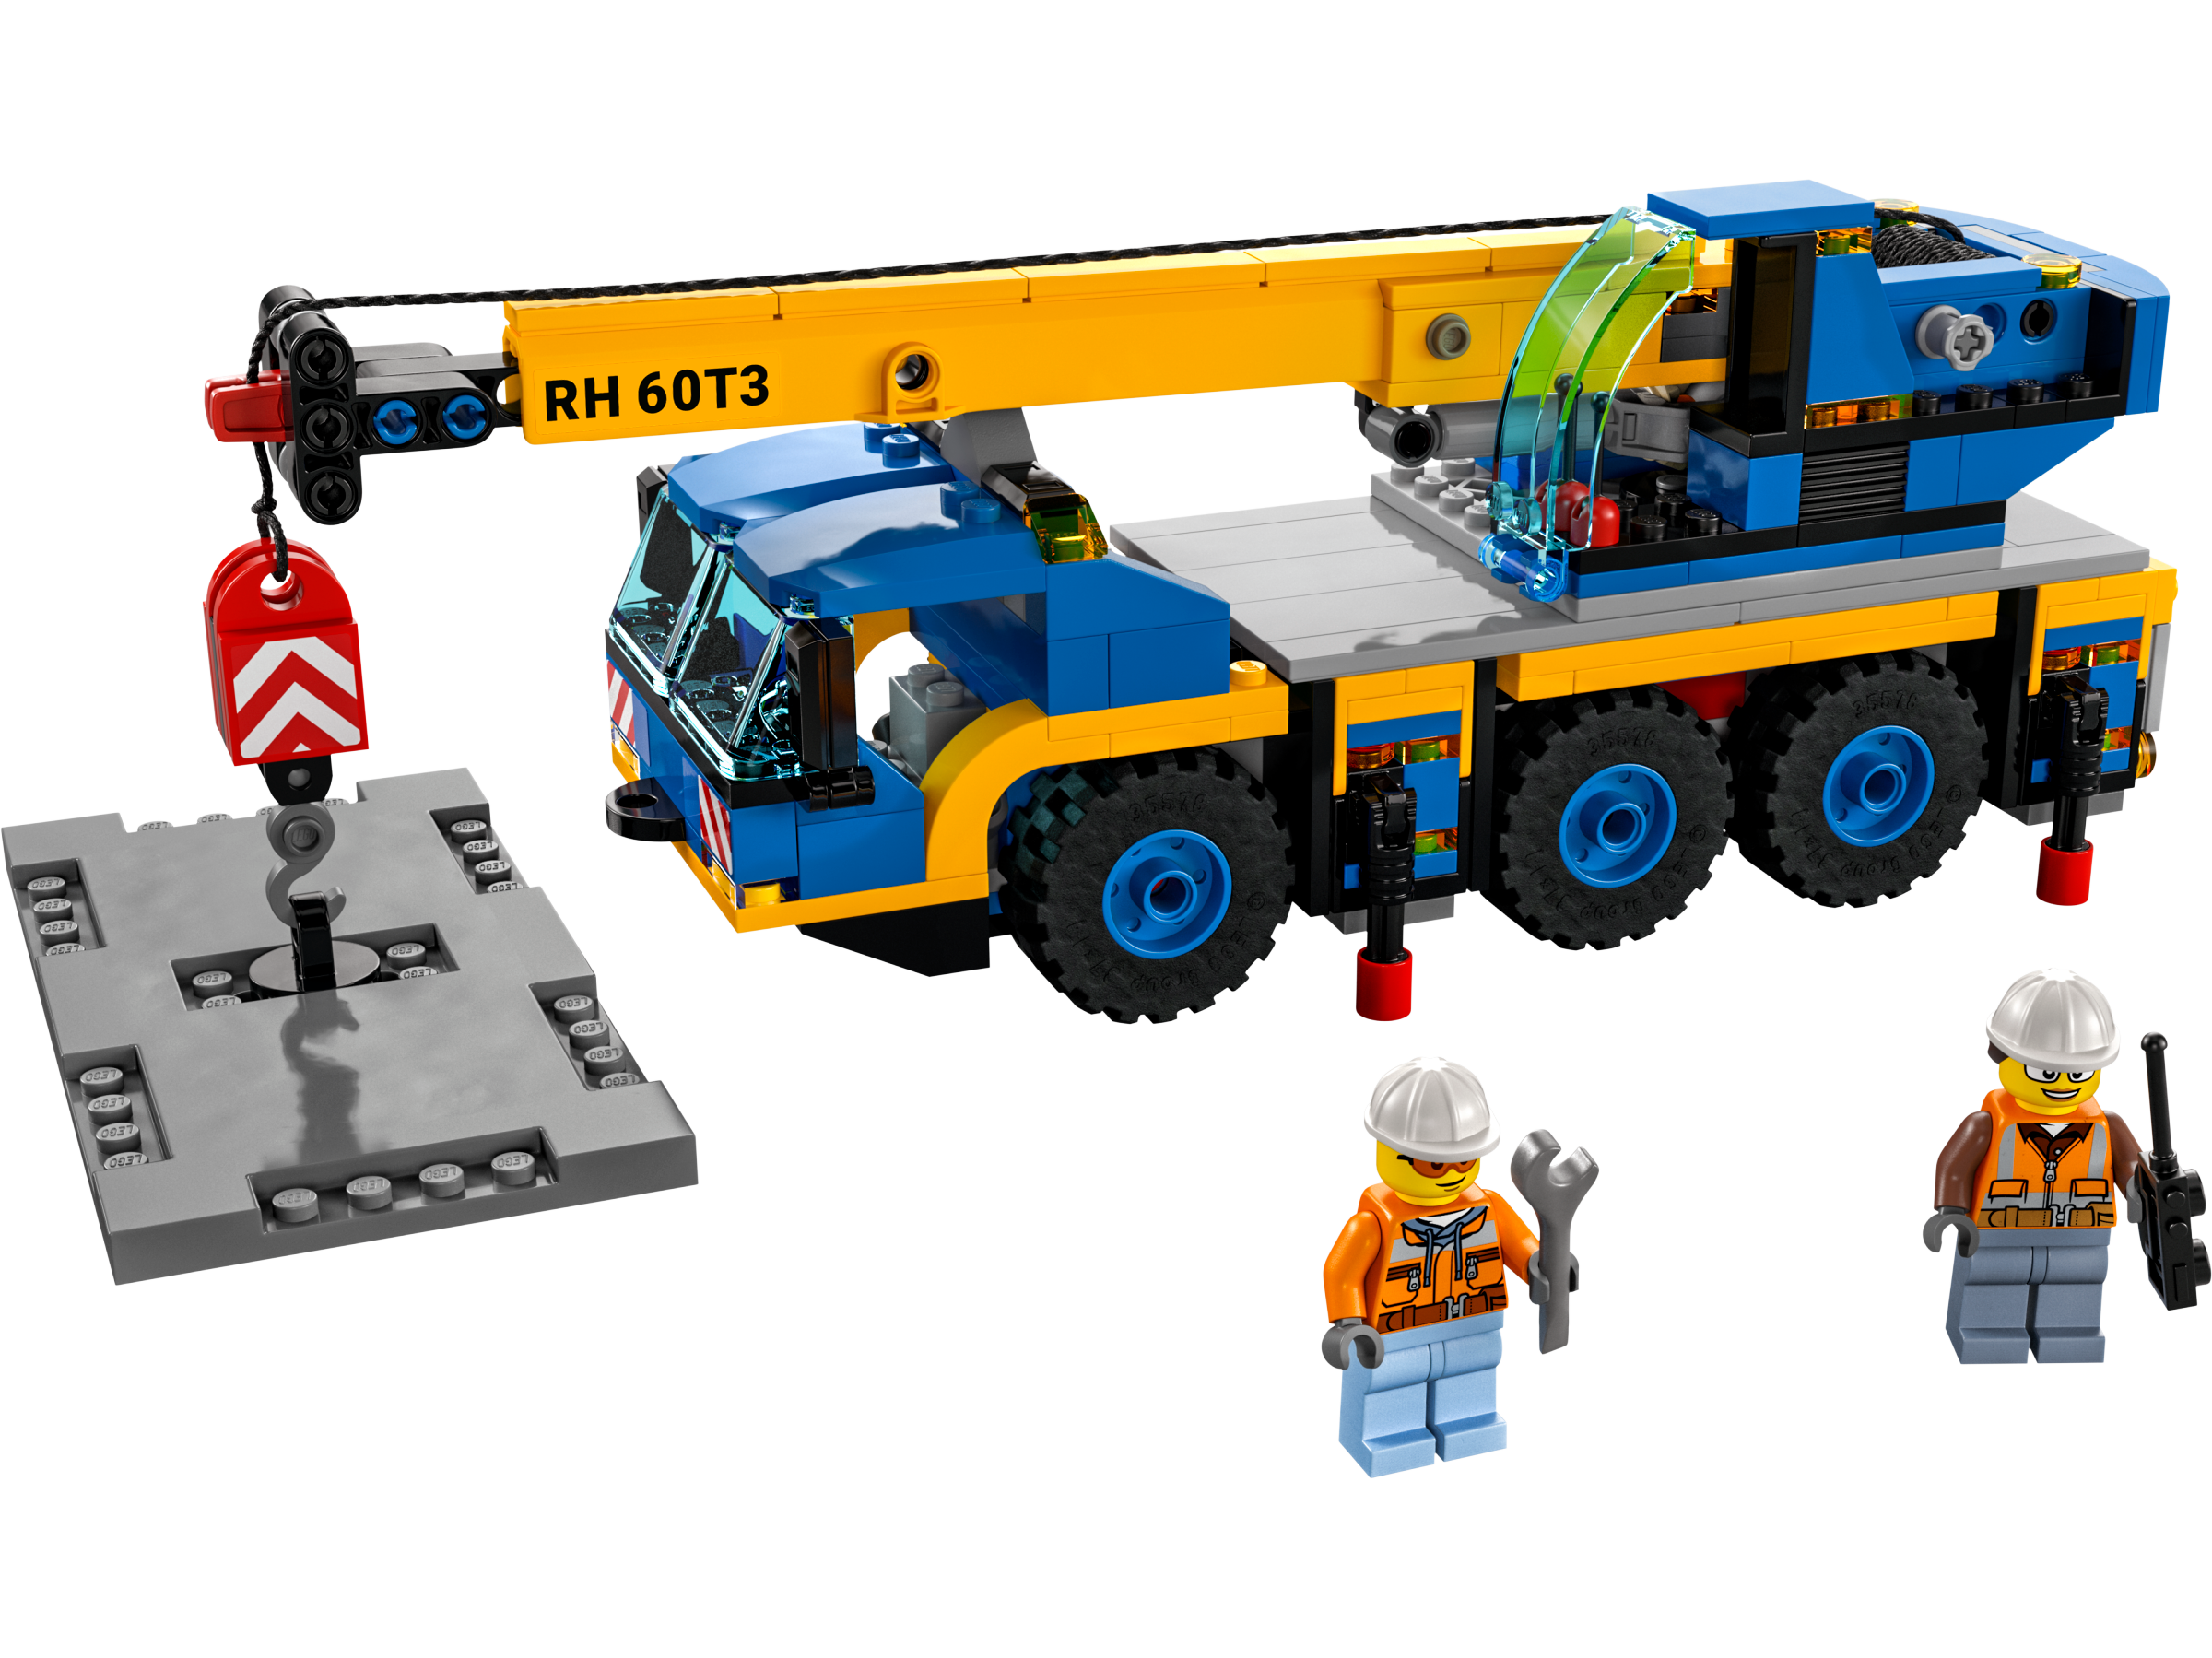 Mobile 60324 | City | Buy online at the Official LEGO® Shop US